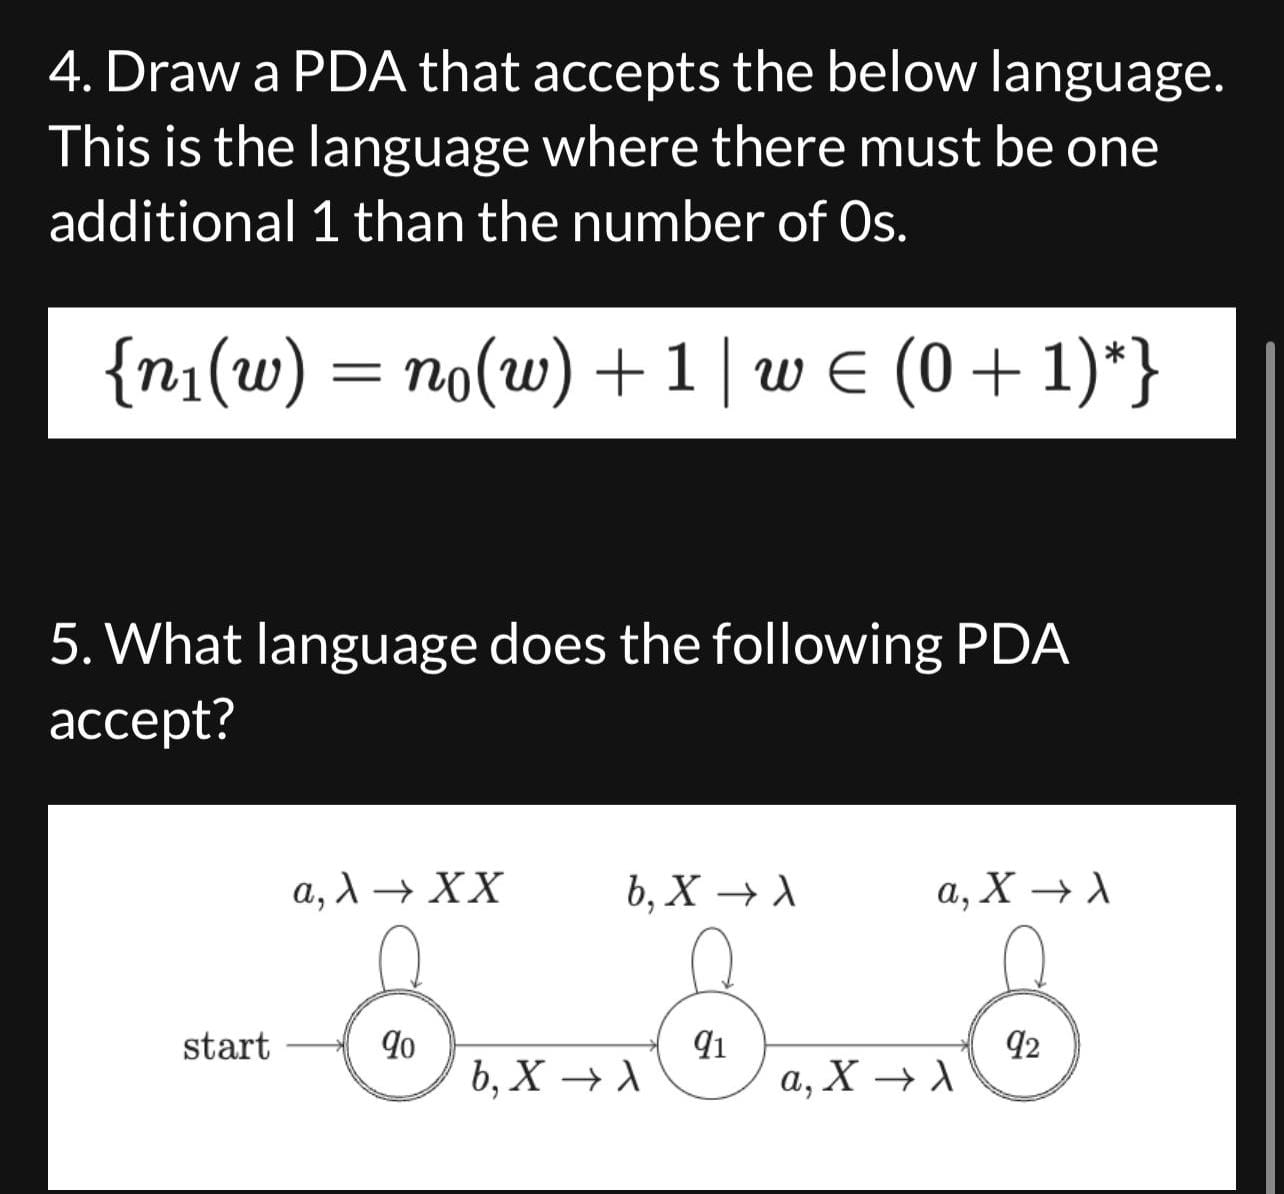 4. Draw a PDA that accepts the below language. This is the language where there must be one additional 1 than